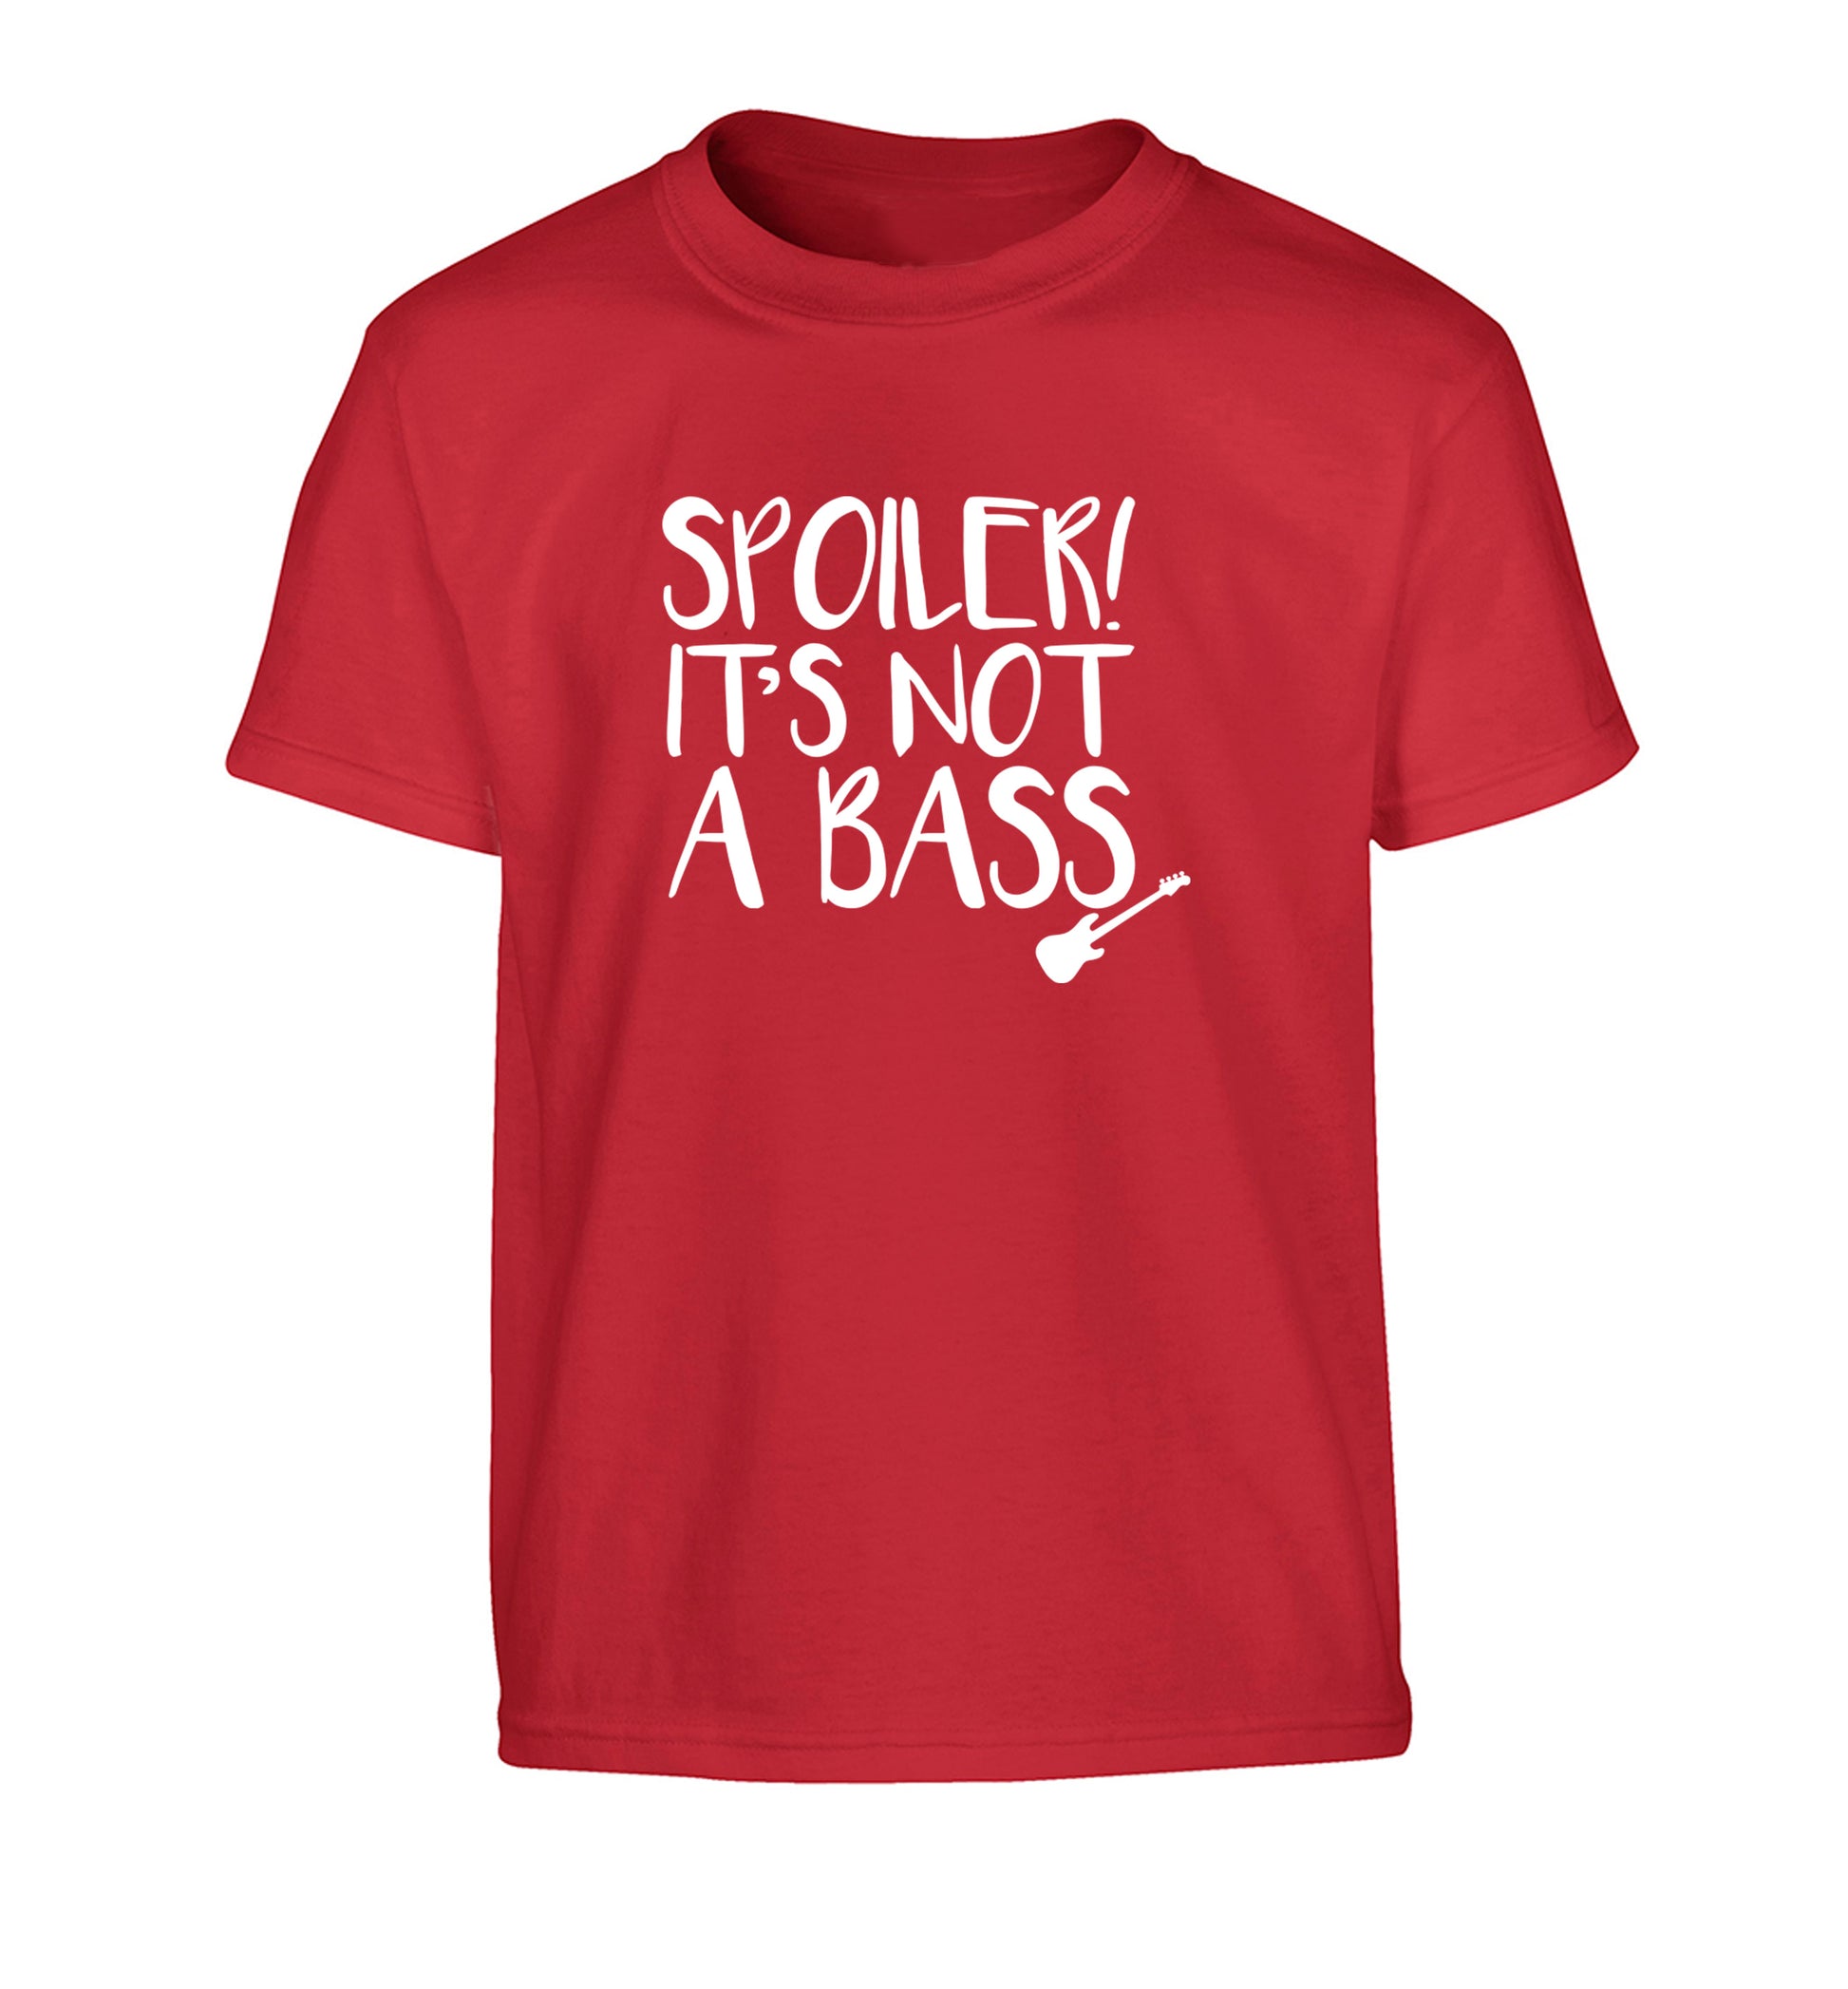 Spoiler it's not a bass Children's red Tshirt 12-13 Years